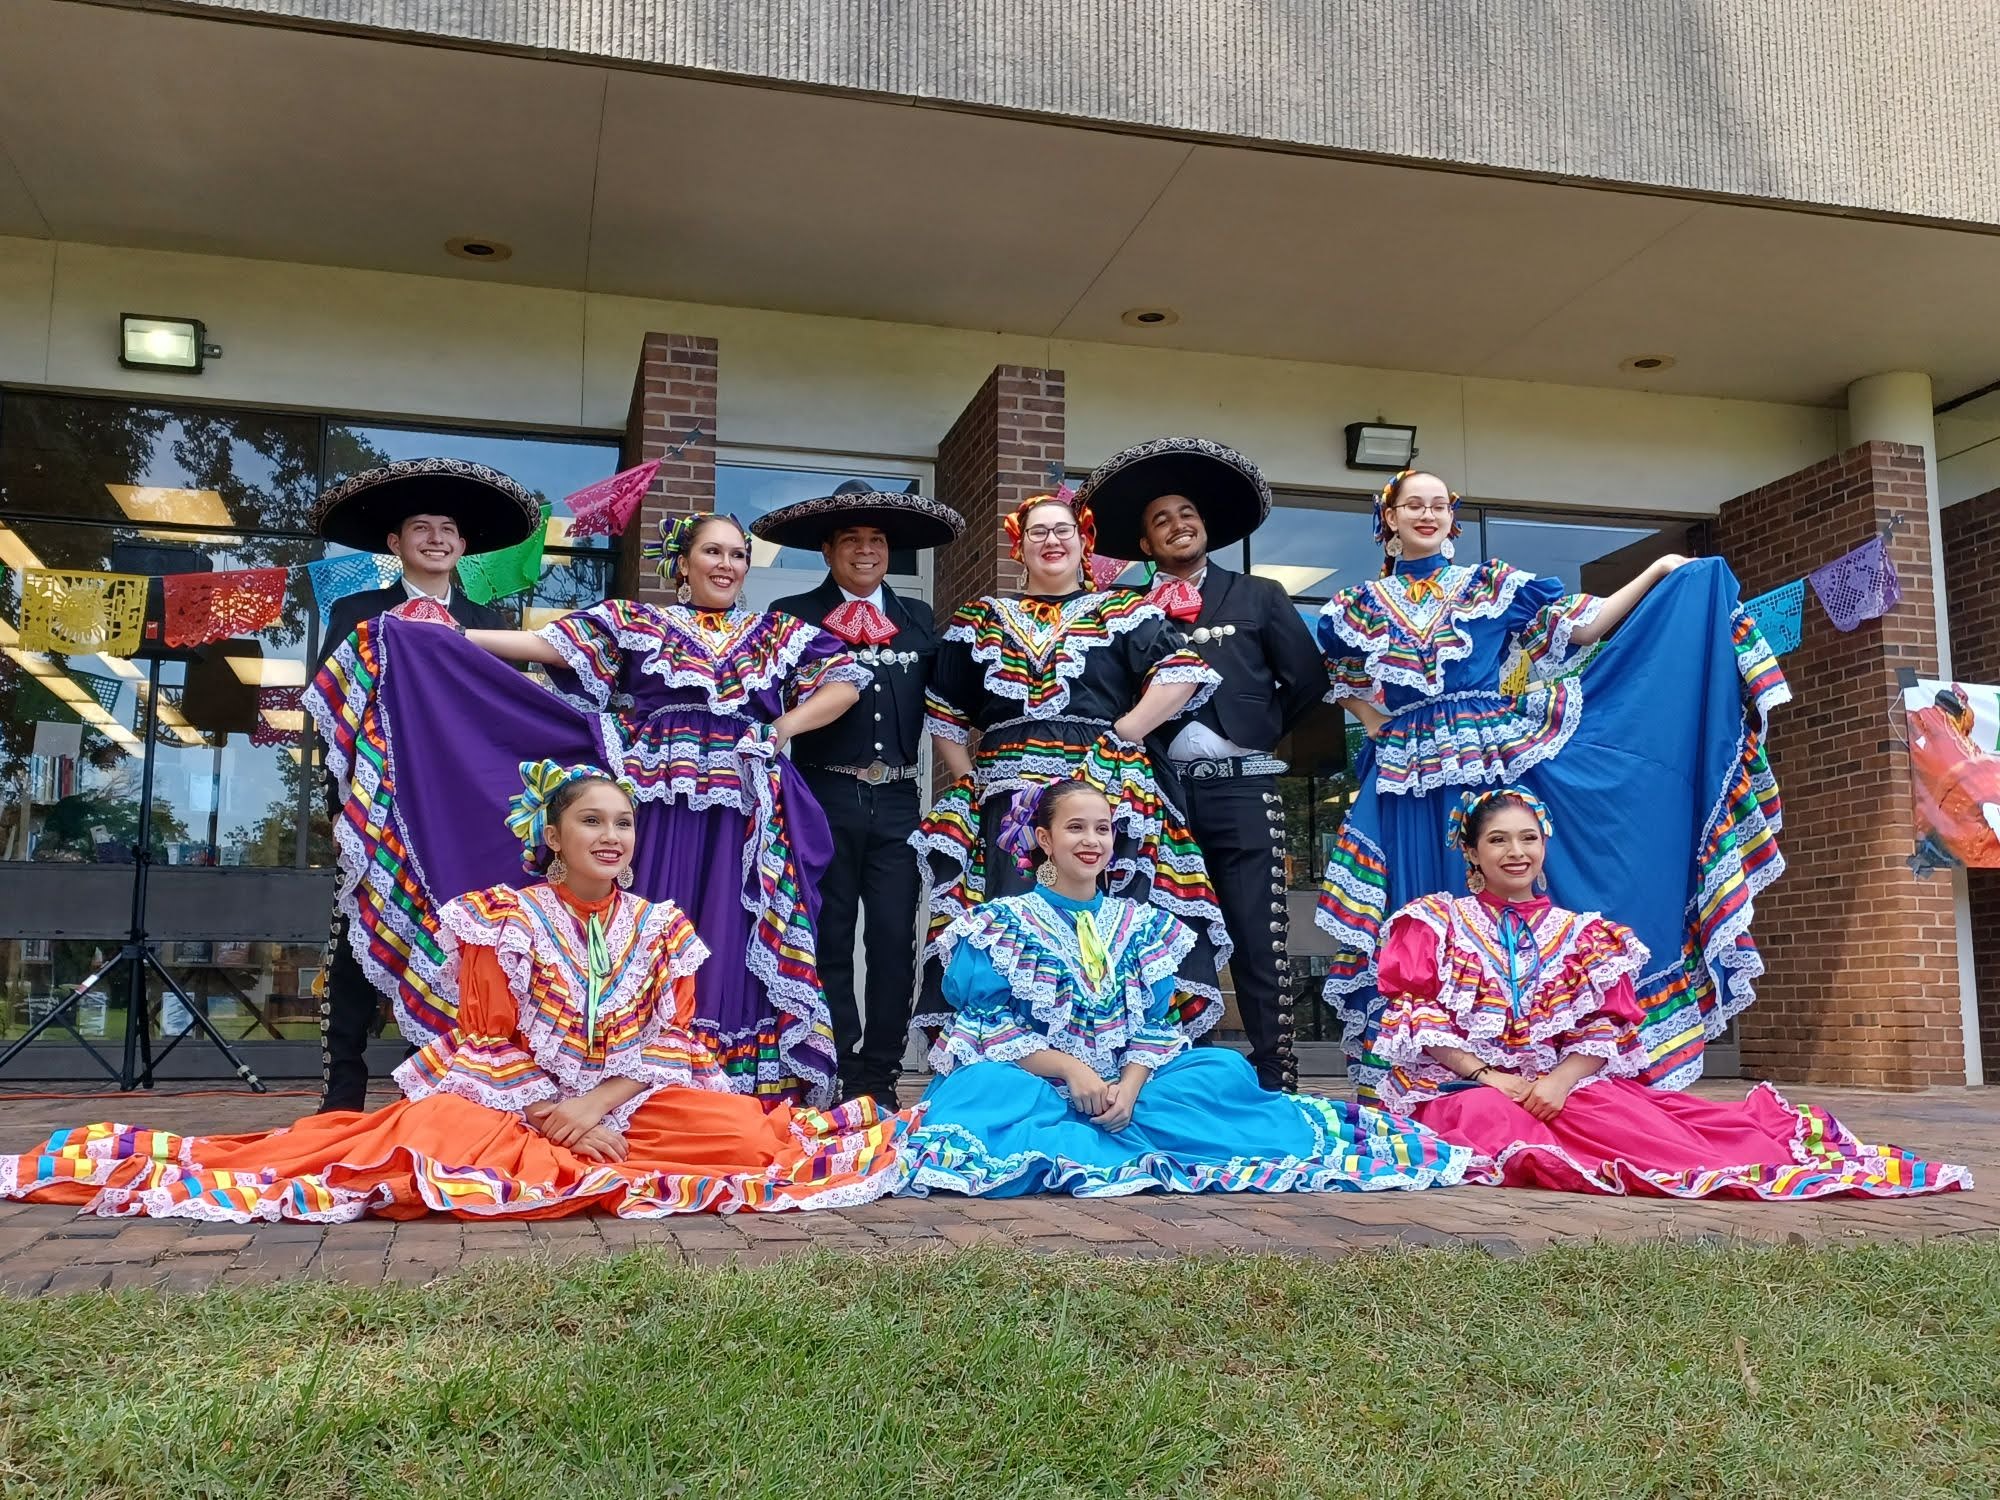 Group photo in colorful costumes